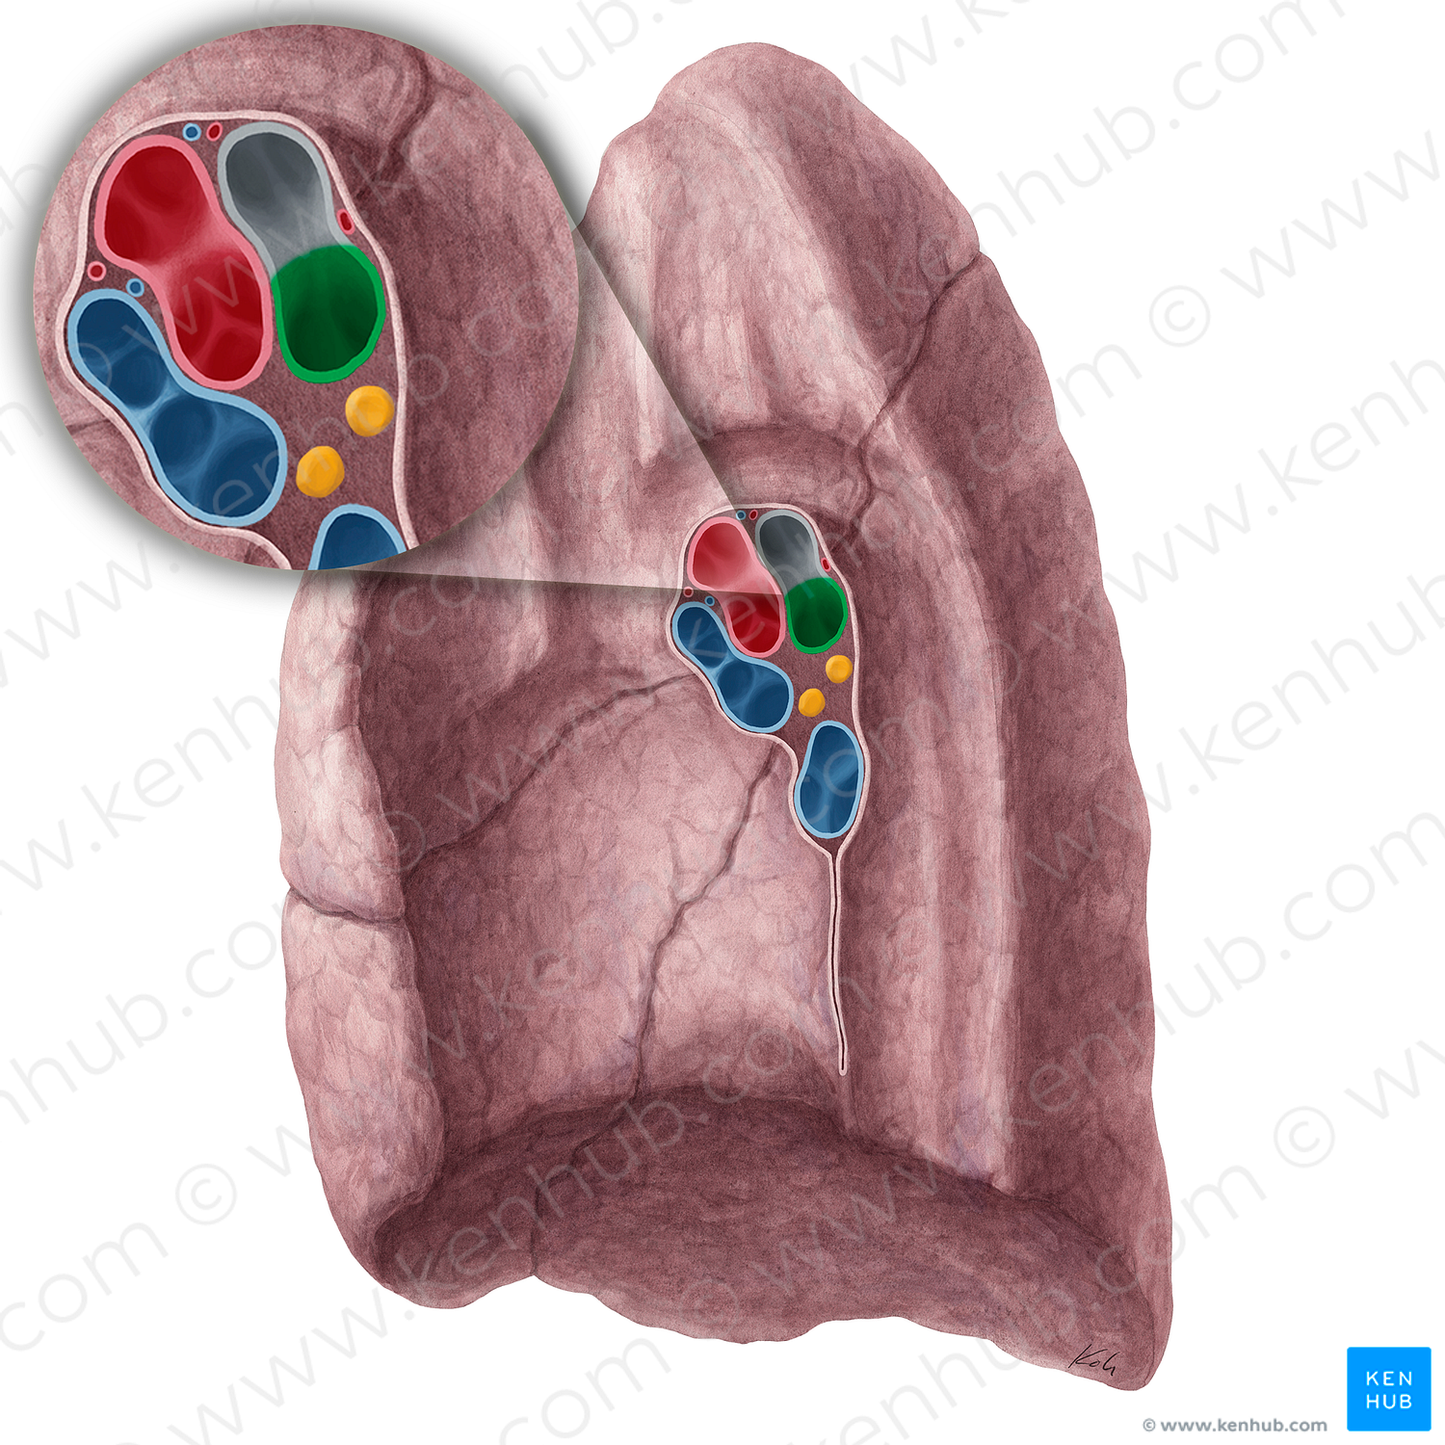 Intermediate bronchus of right lung (#2209)